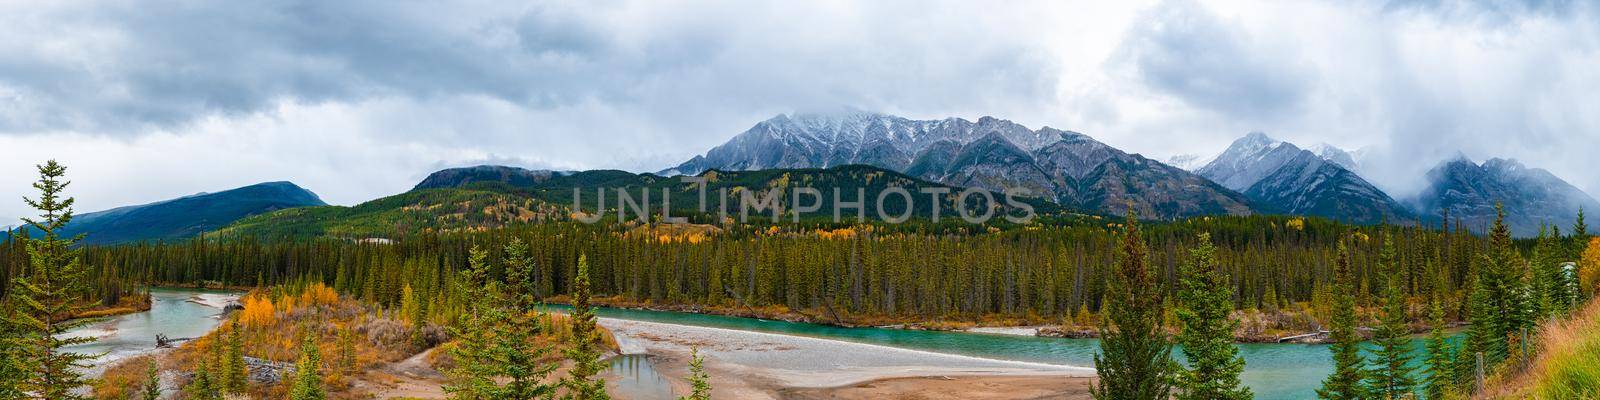 Canadian rockies in Canada with blue green river Bow valley under the surveillance of mighty Rocky Mountains by fokkebok